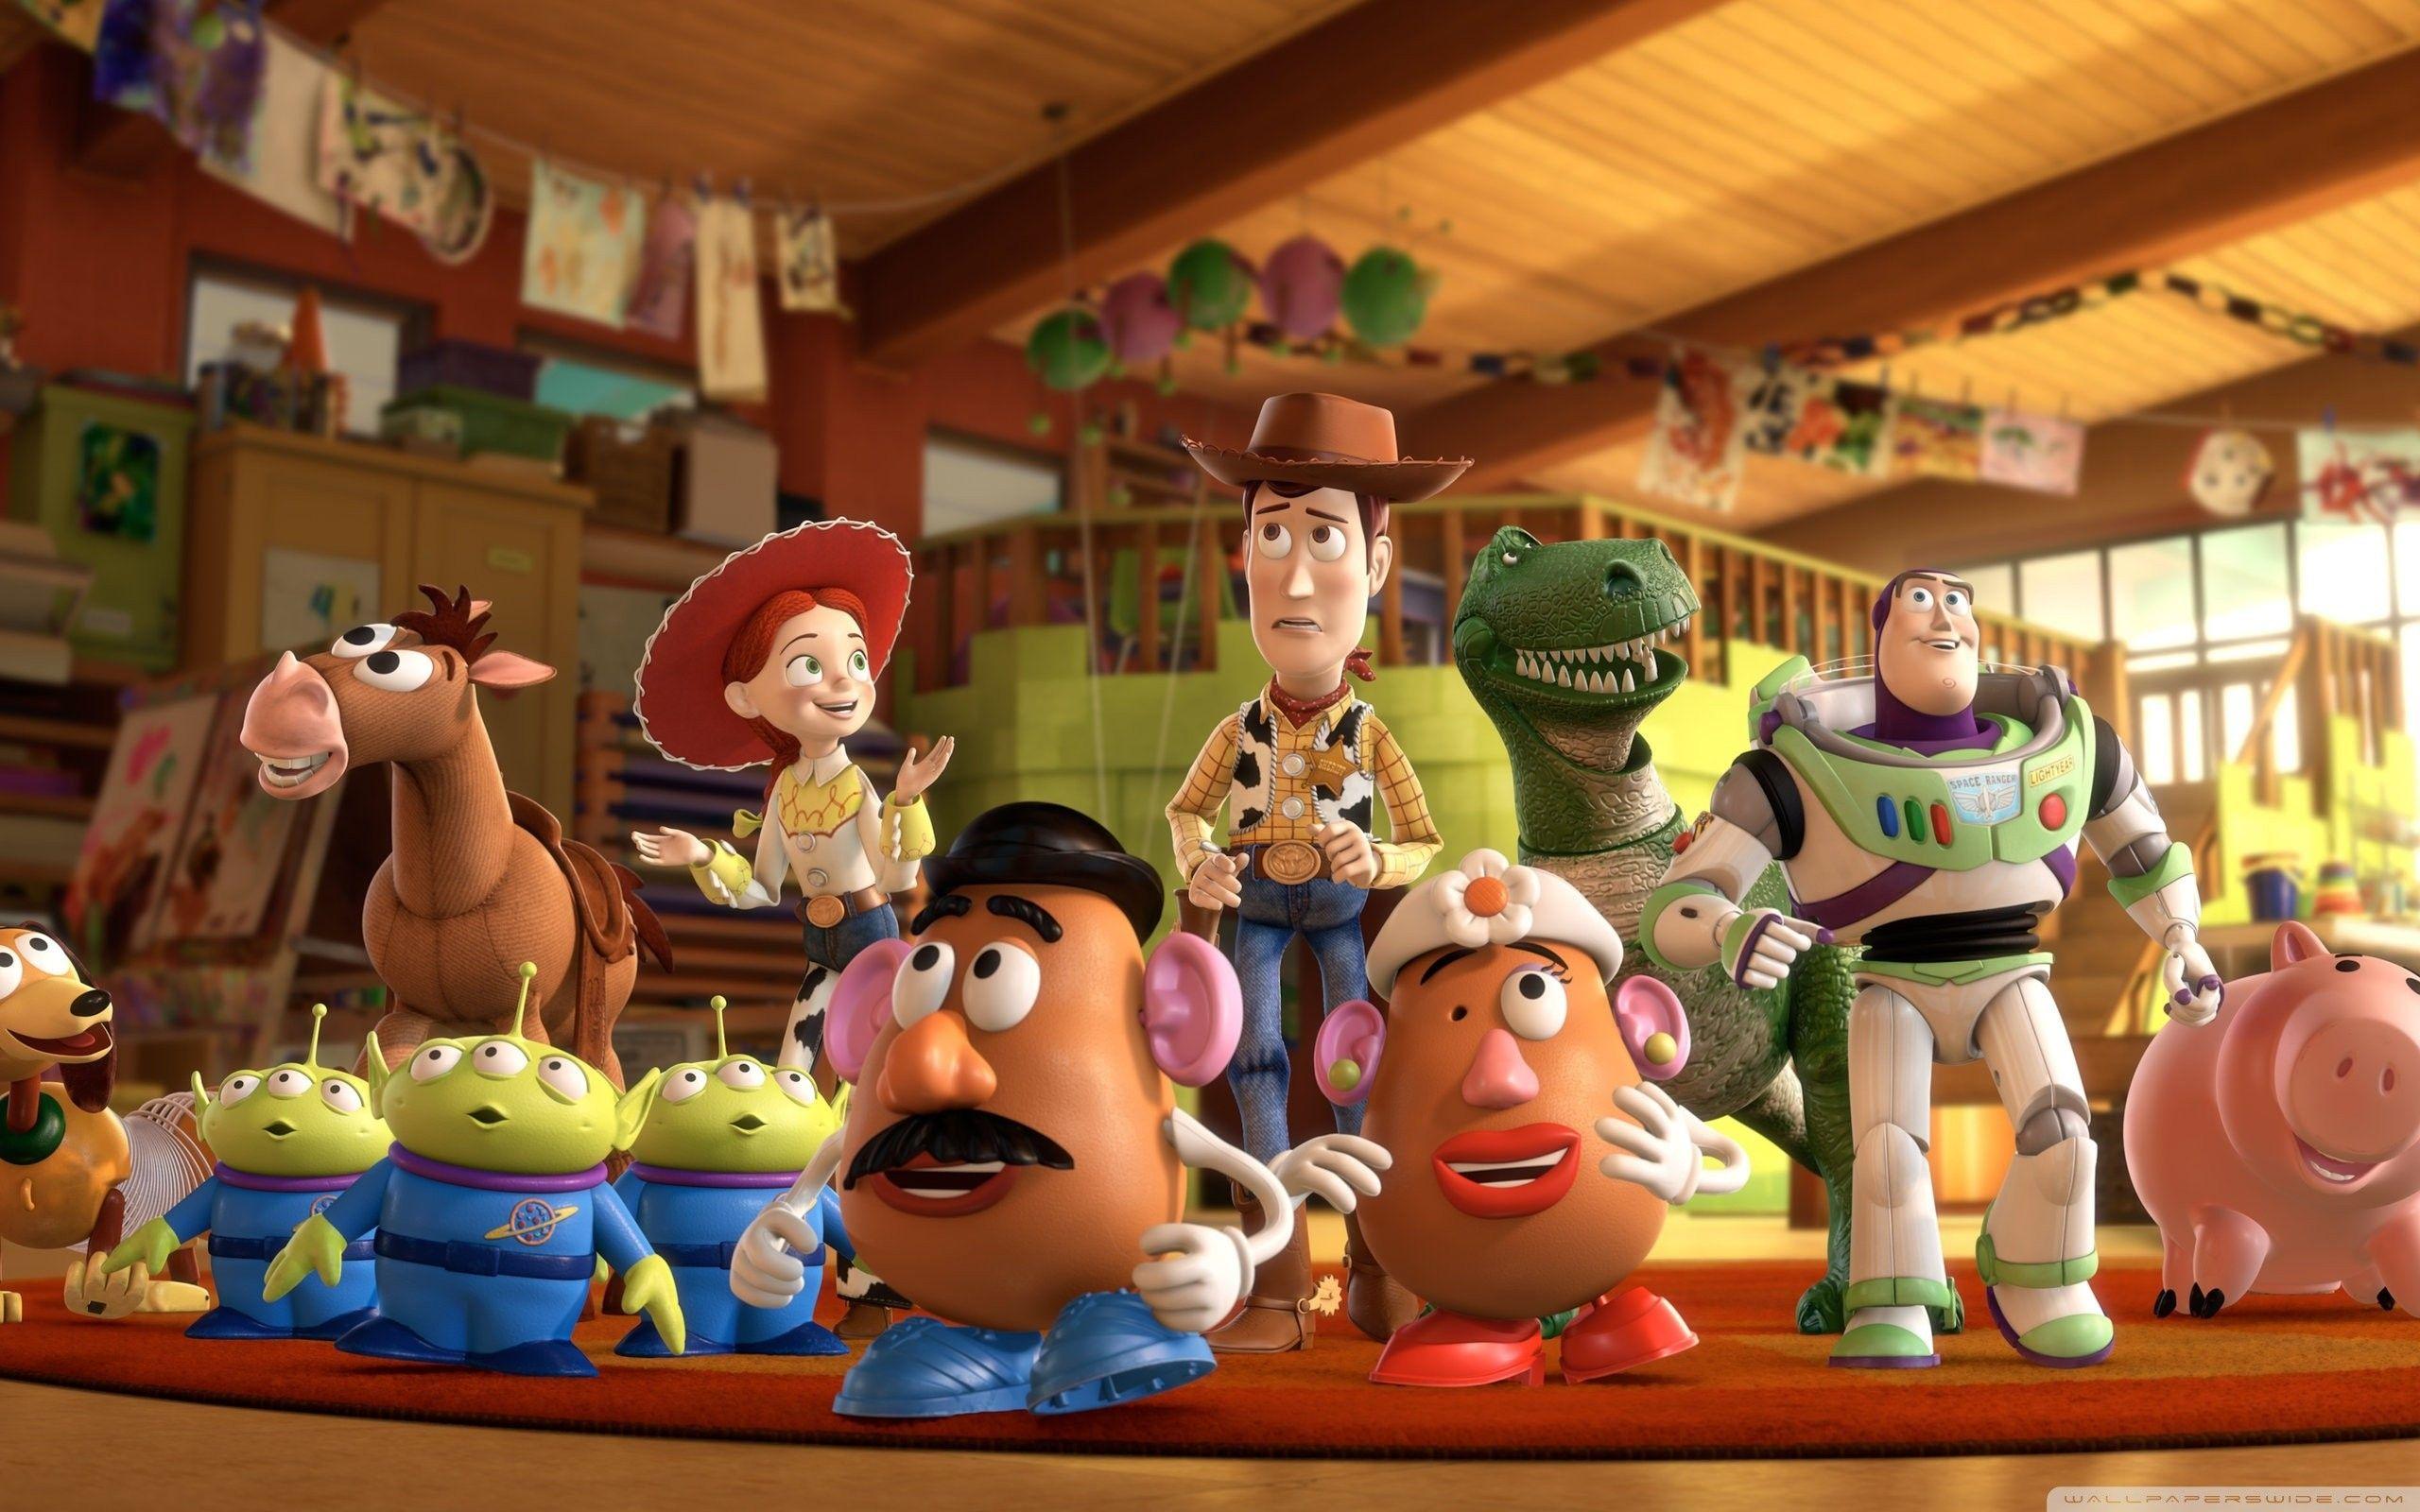 Disney Toy Story Wallpapers Top Free Disney Toy Story Backgrounds Wallpaperaccess